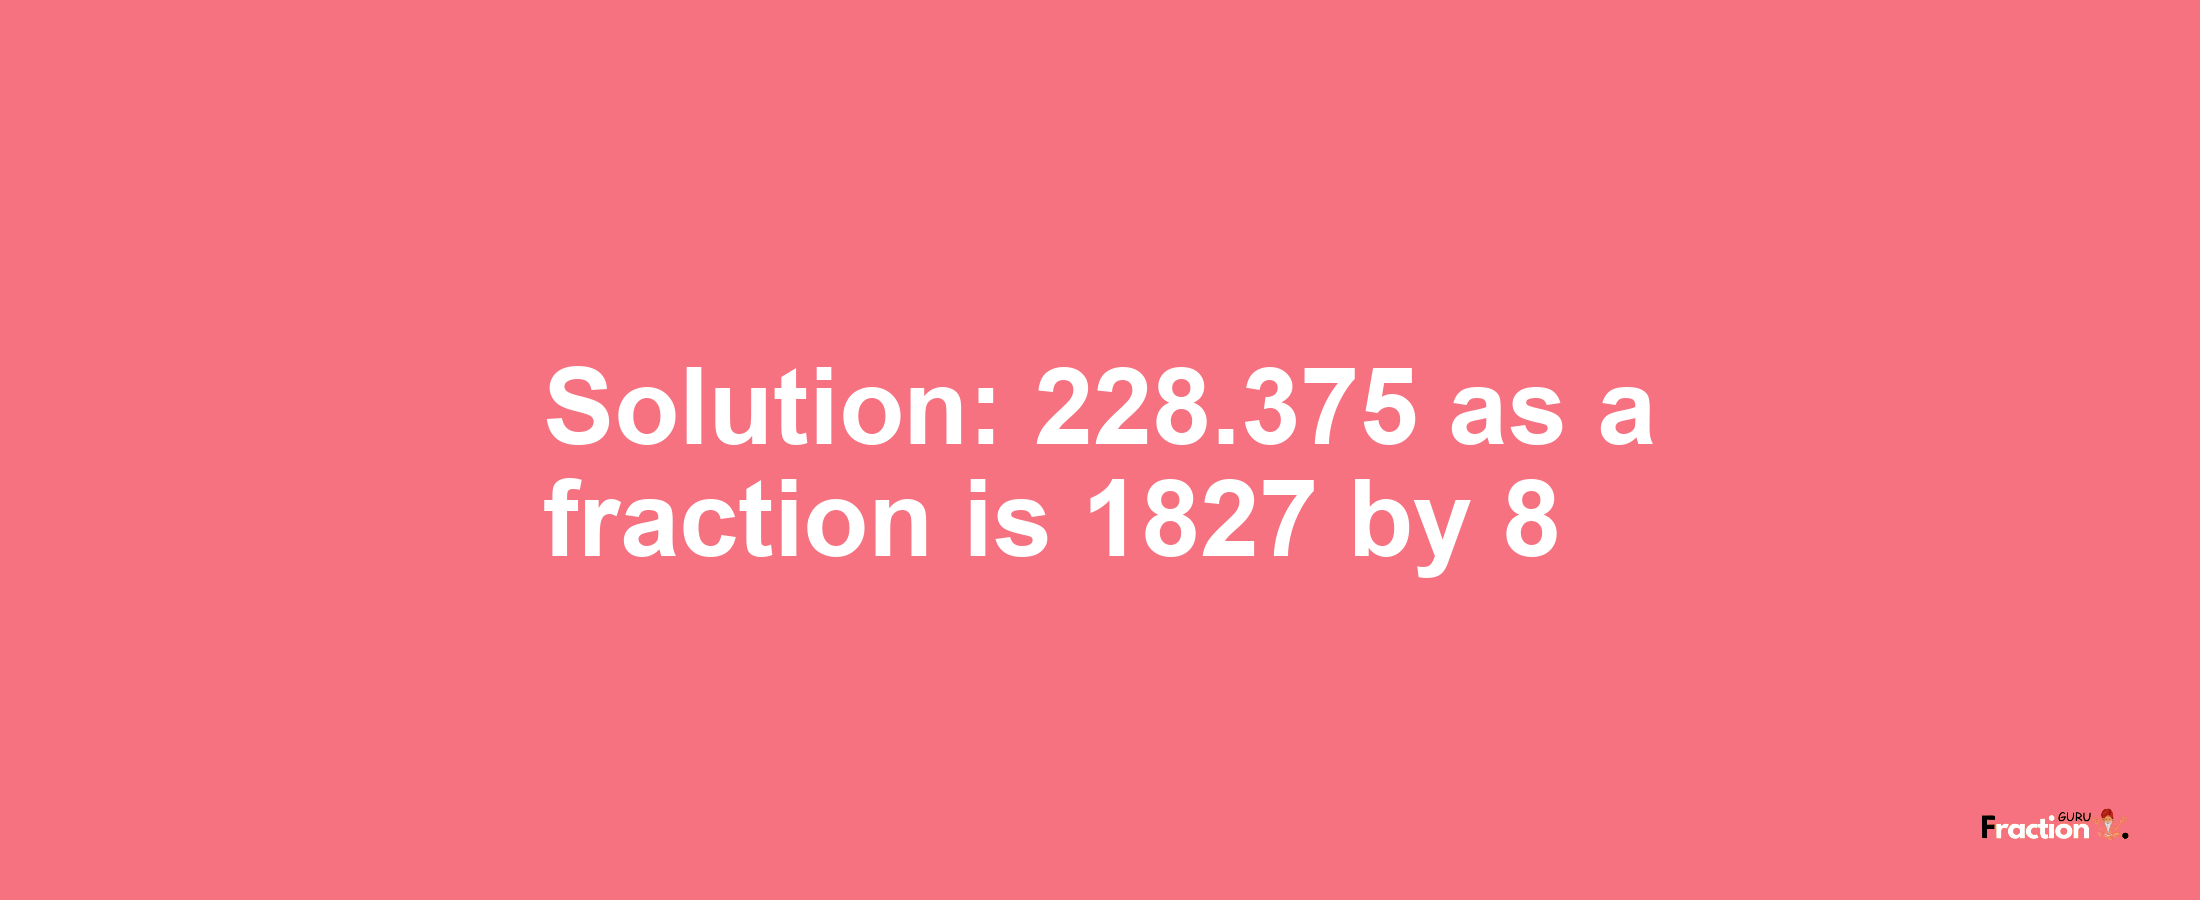 Solution:228.375 as a fraction is 1827/8